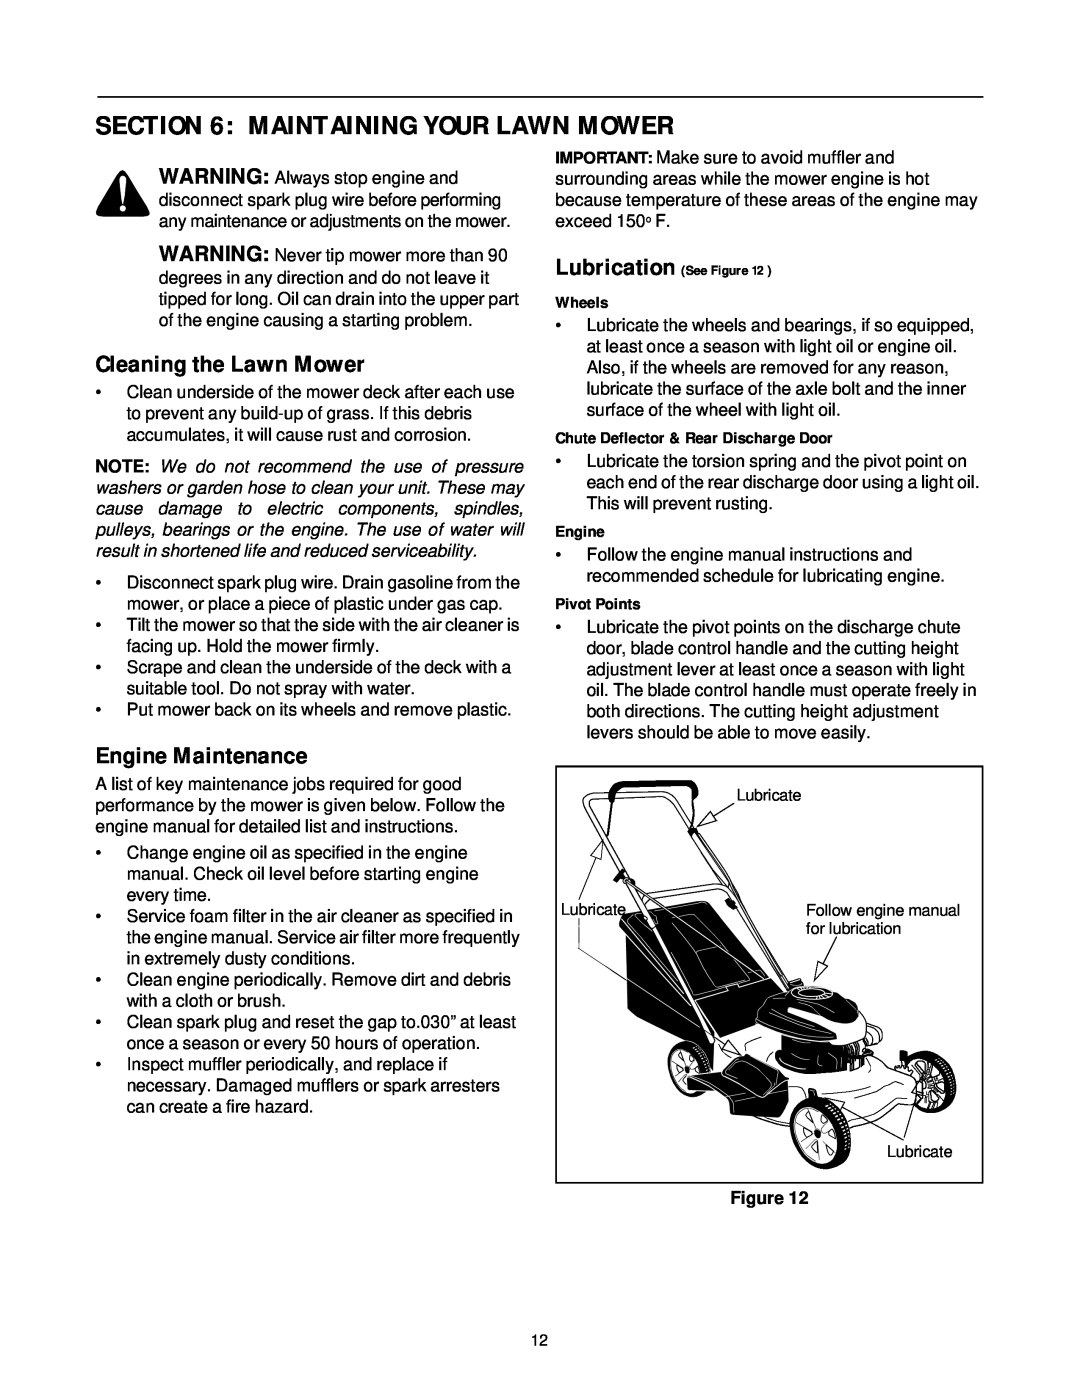 Yard-Man 435 manual Maintaining Your Lawn Mower, Cleaning the Lawn Mower, Engine Maintenance, Wheels, Pivot Points 